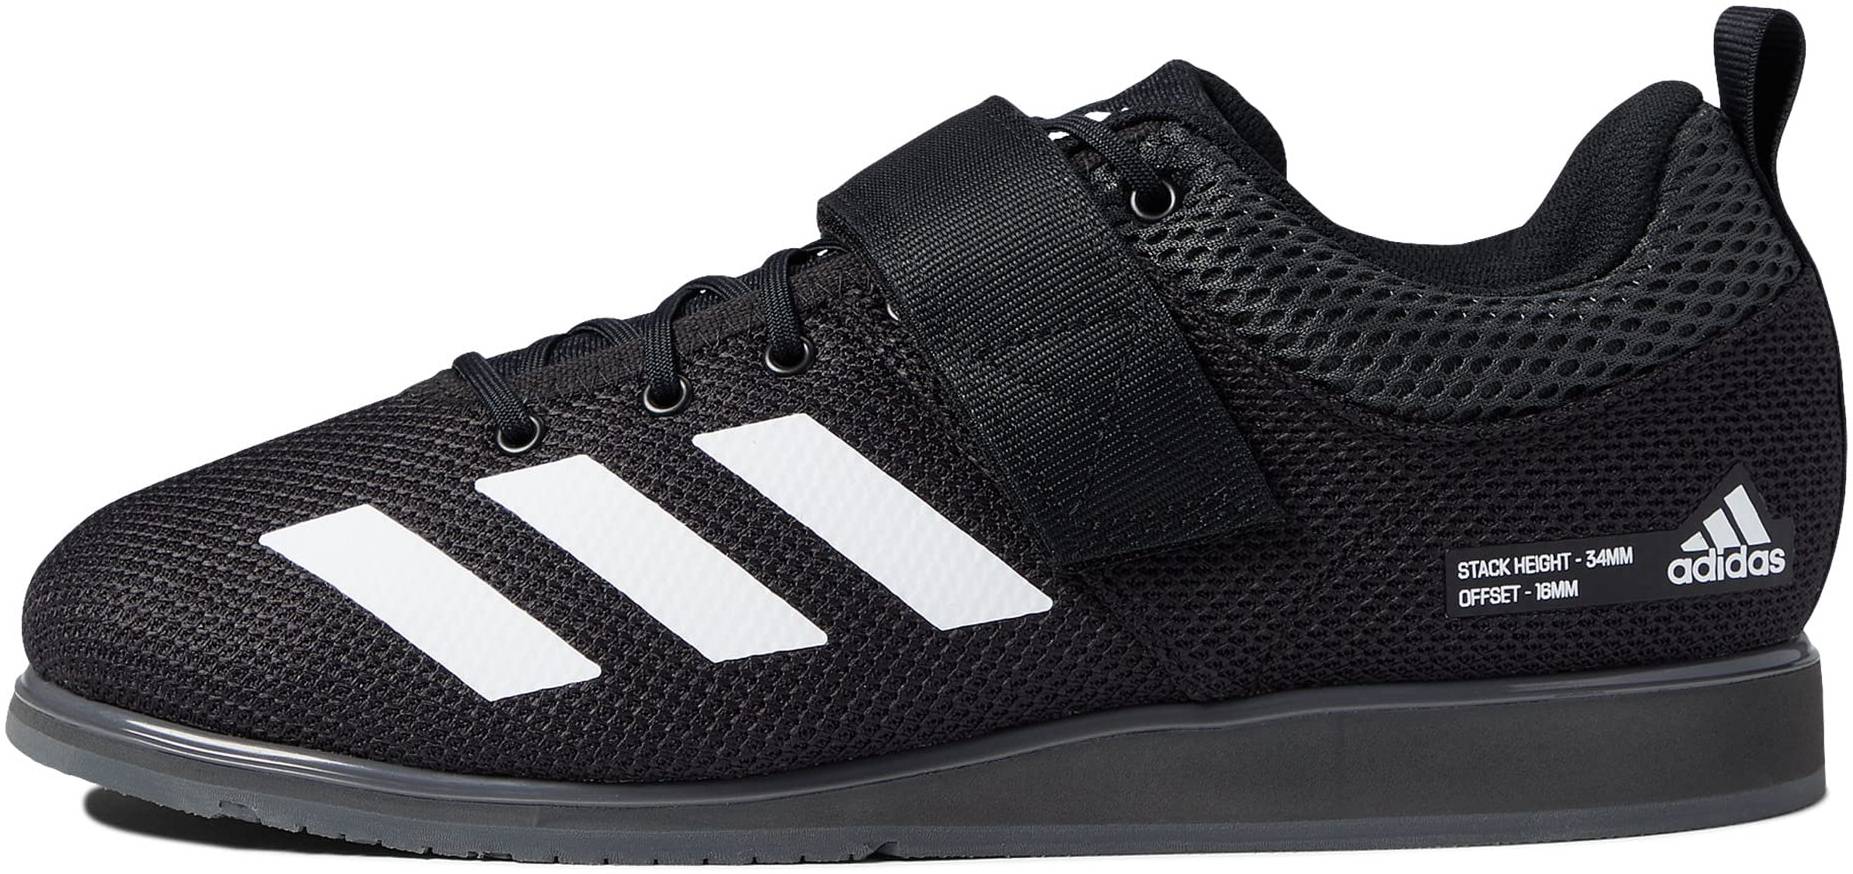 Transporte Macadán Me gusta 20+ Adidas training shoes: Save up to 51% | RunRepeat